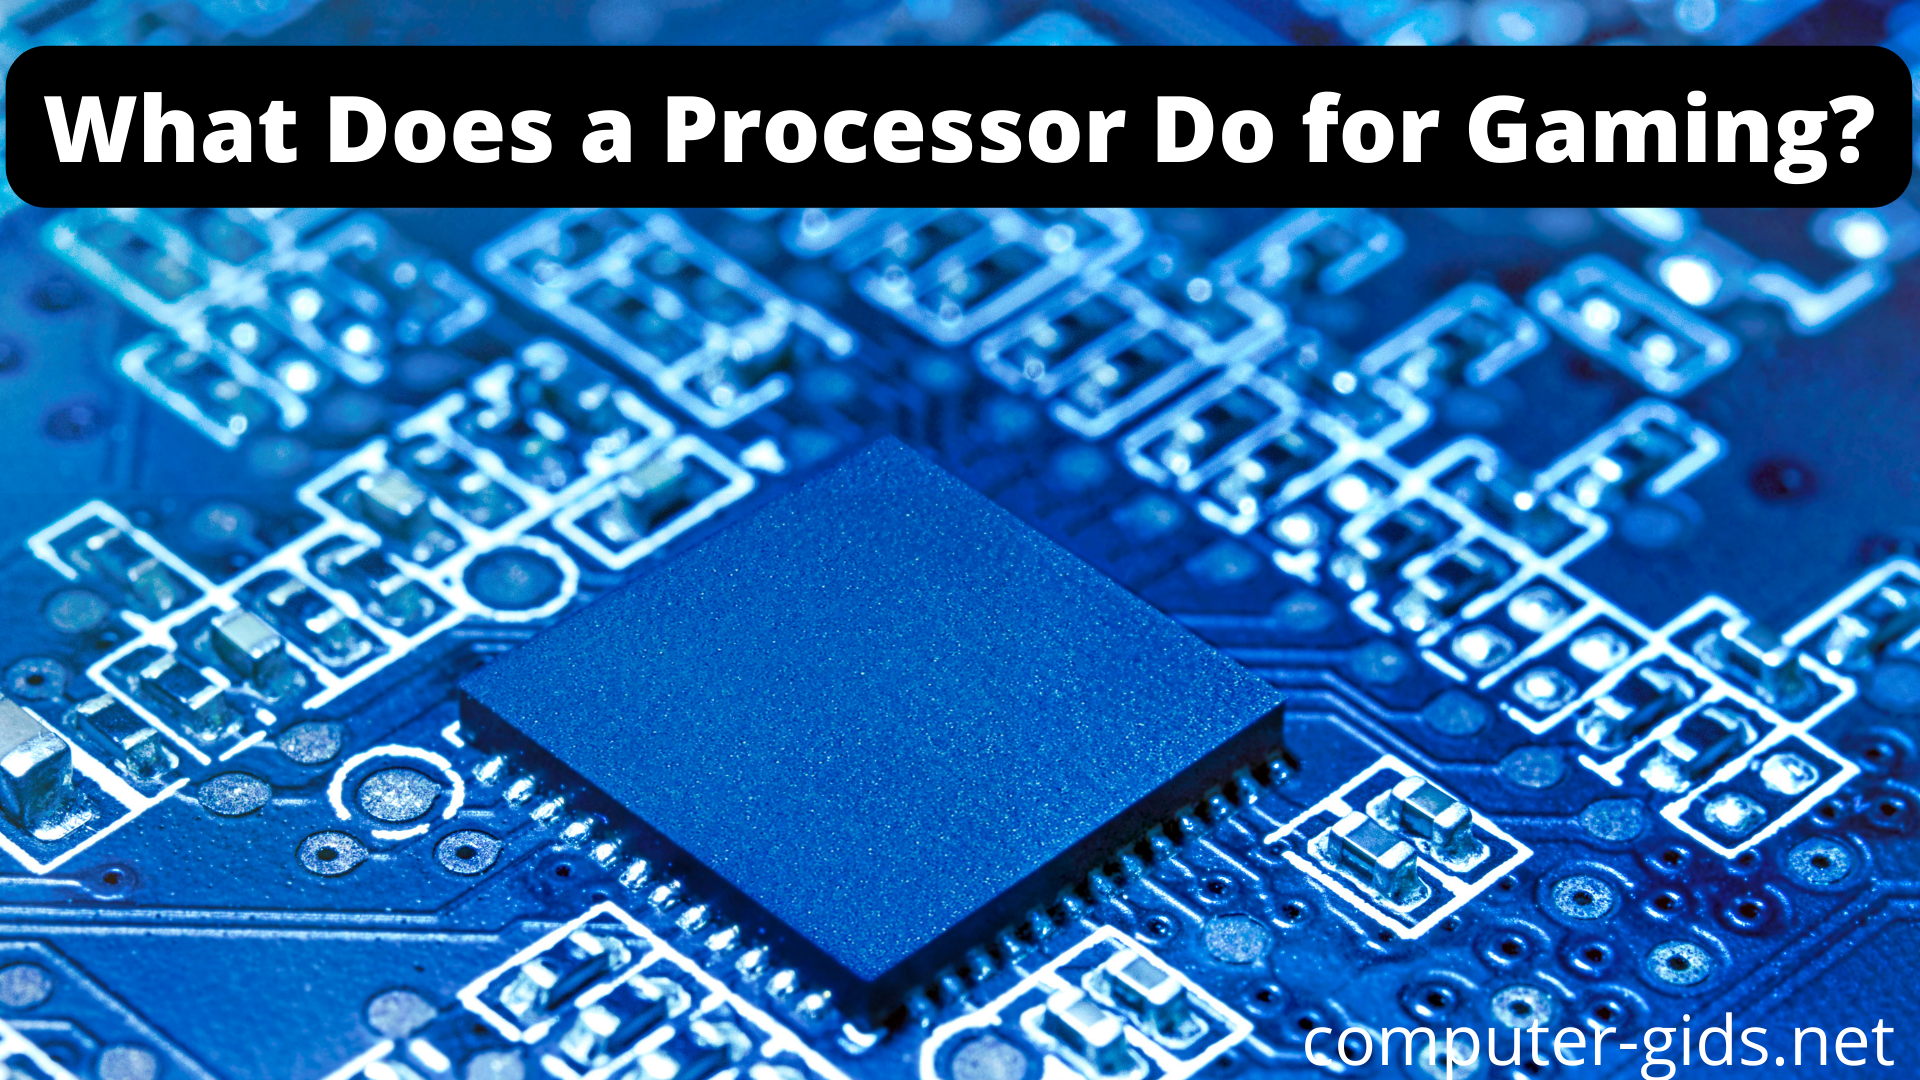 What Does a Processor Do for Gaming